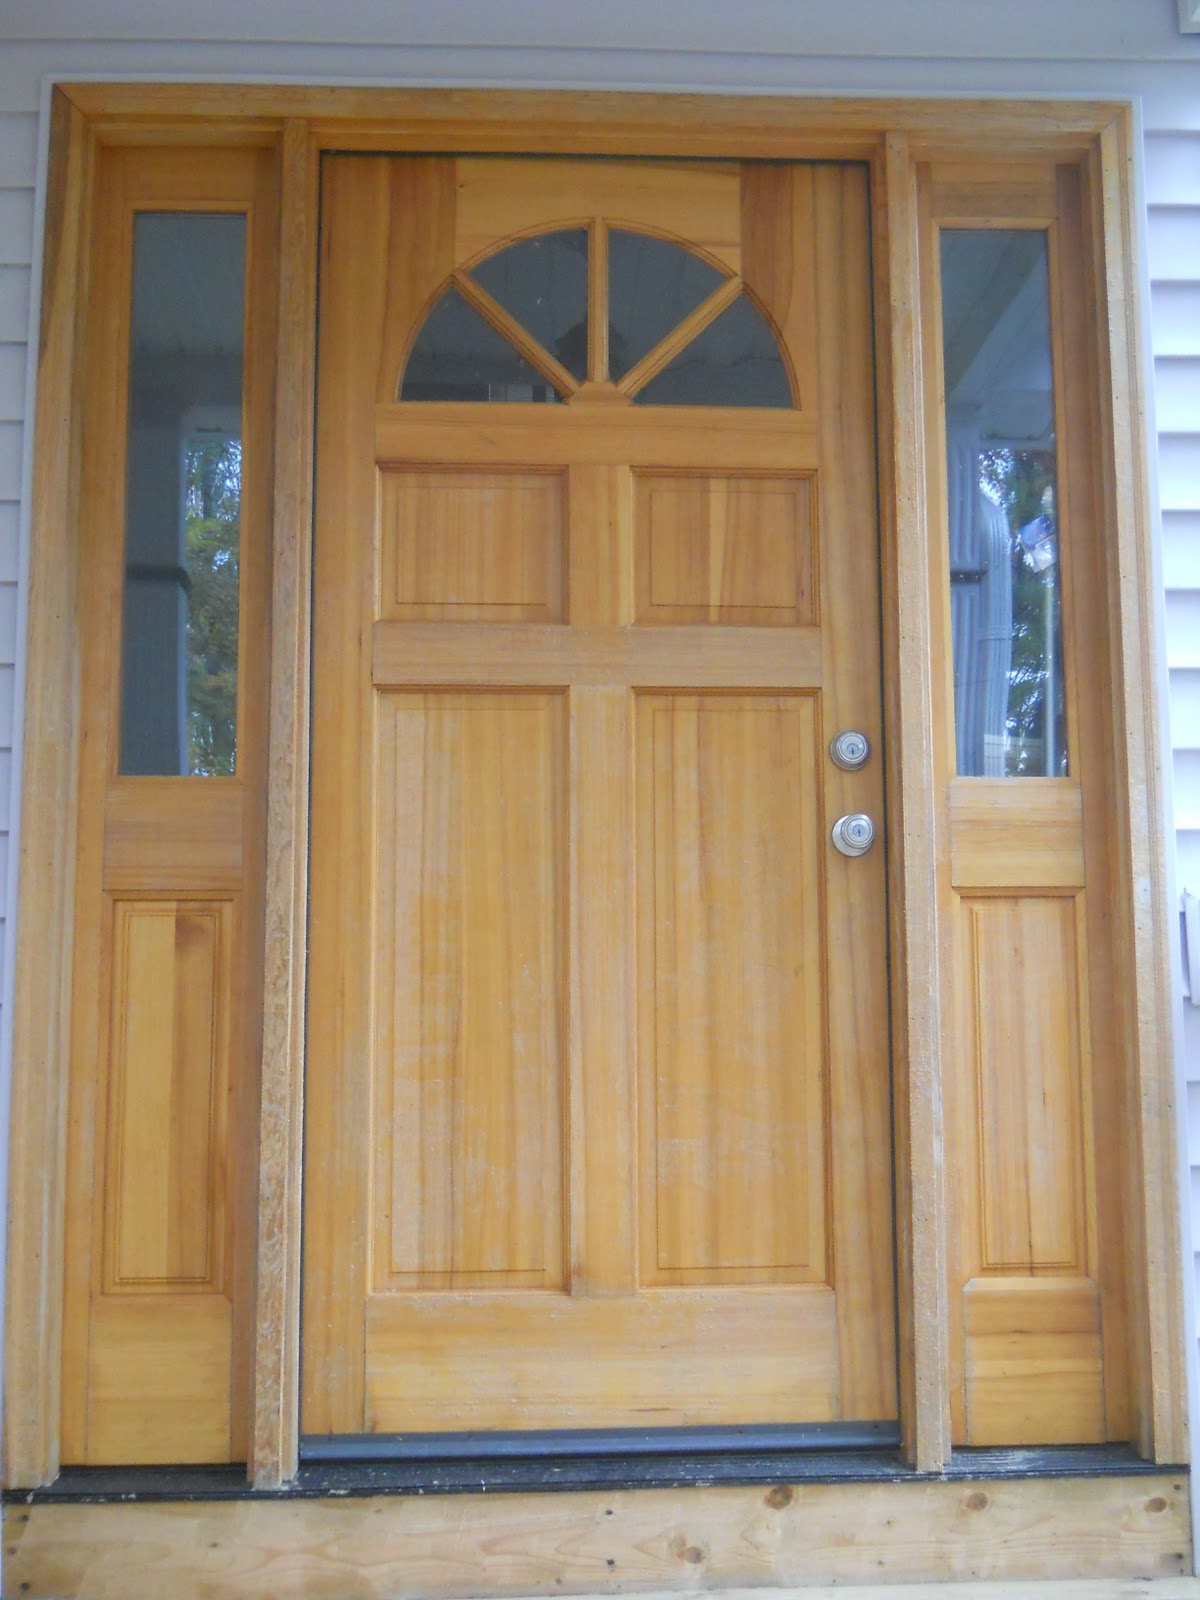 Projects: New life for a tired front door